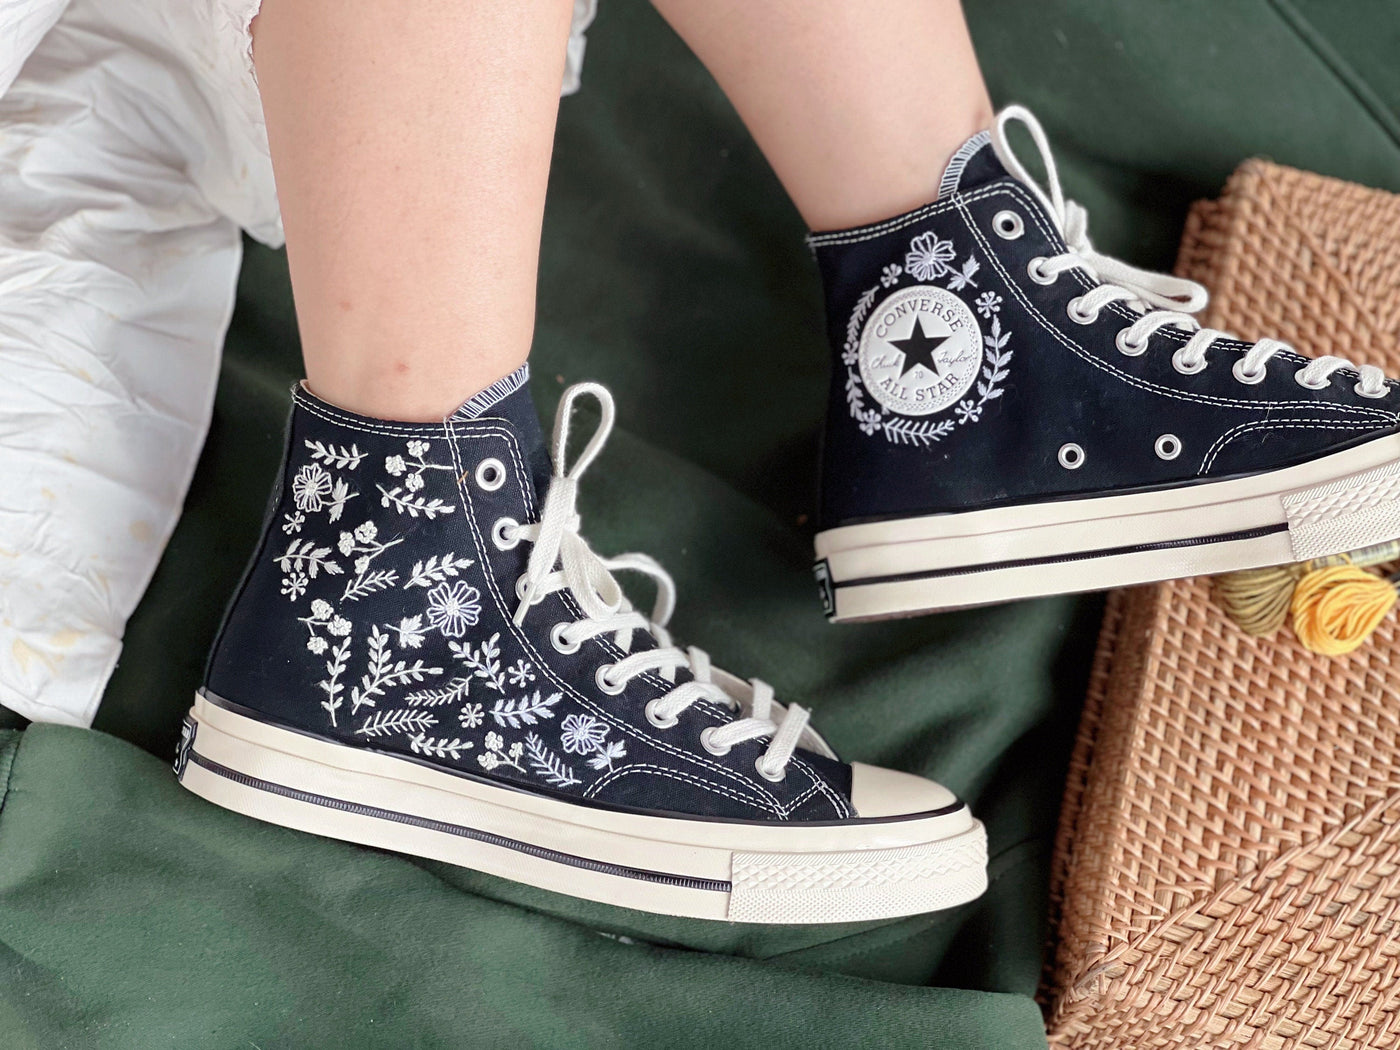 Embroidered Converse,Floral Converse,Embroidered Converse Chuck Taylor